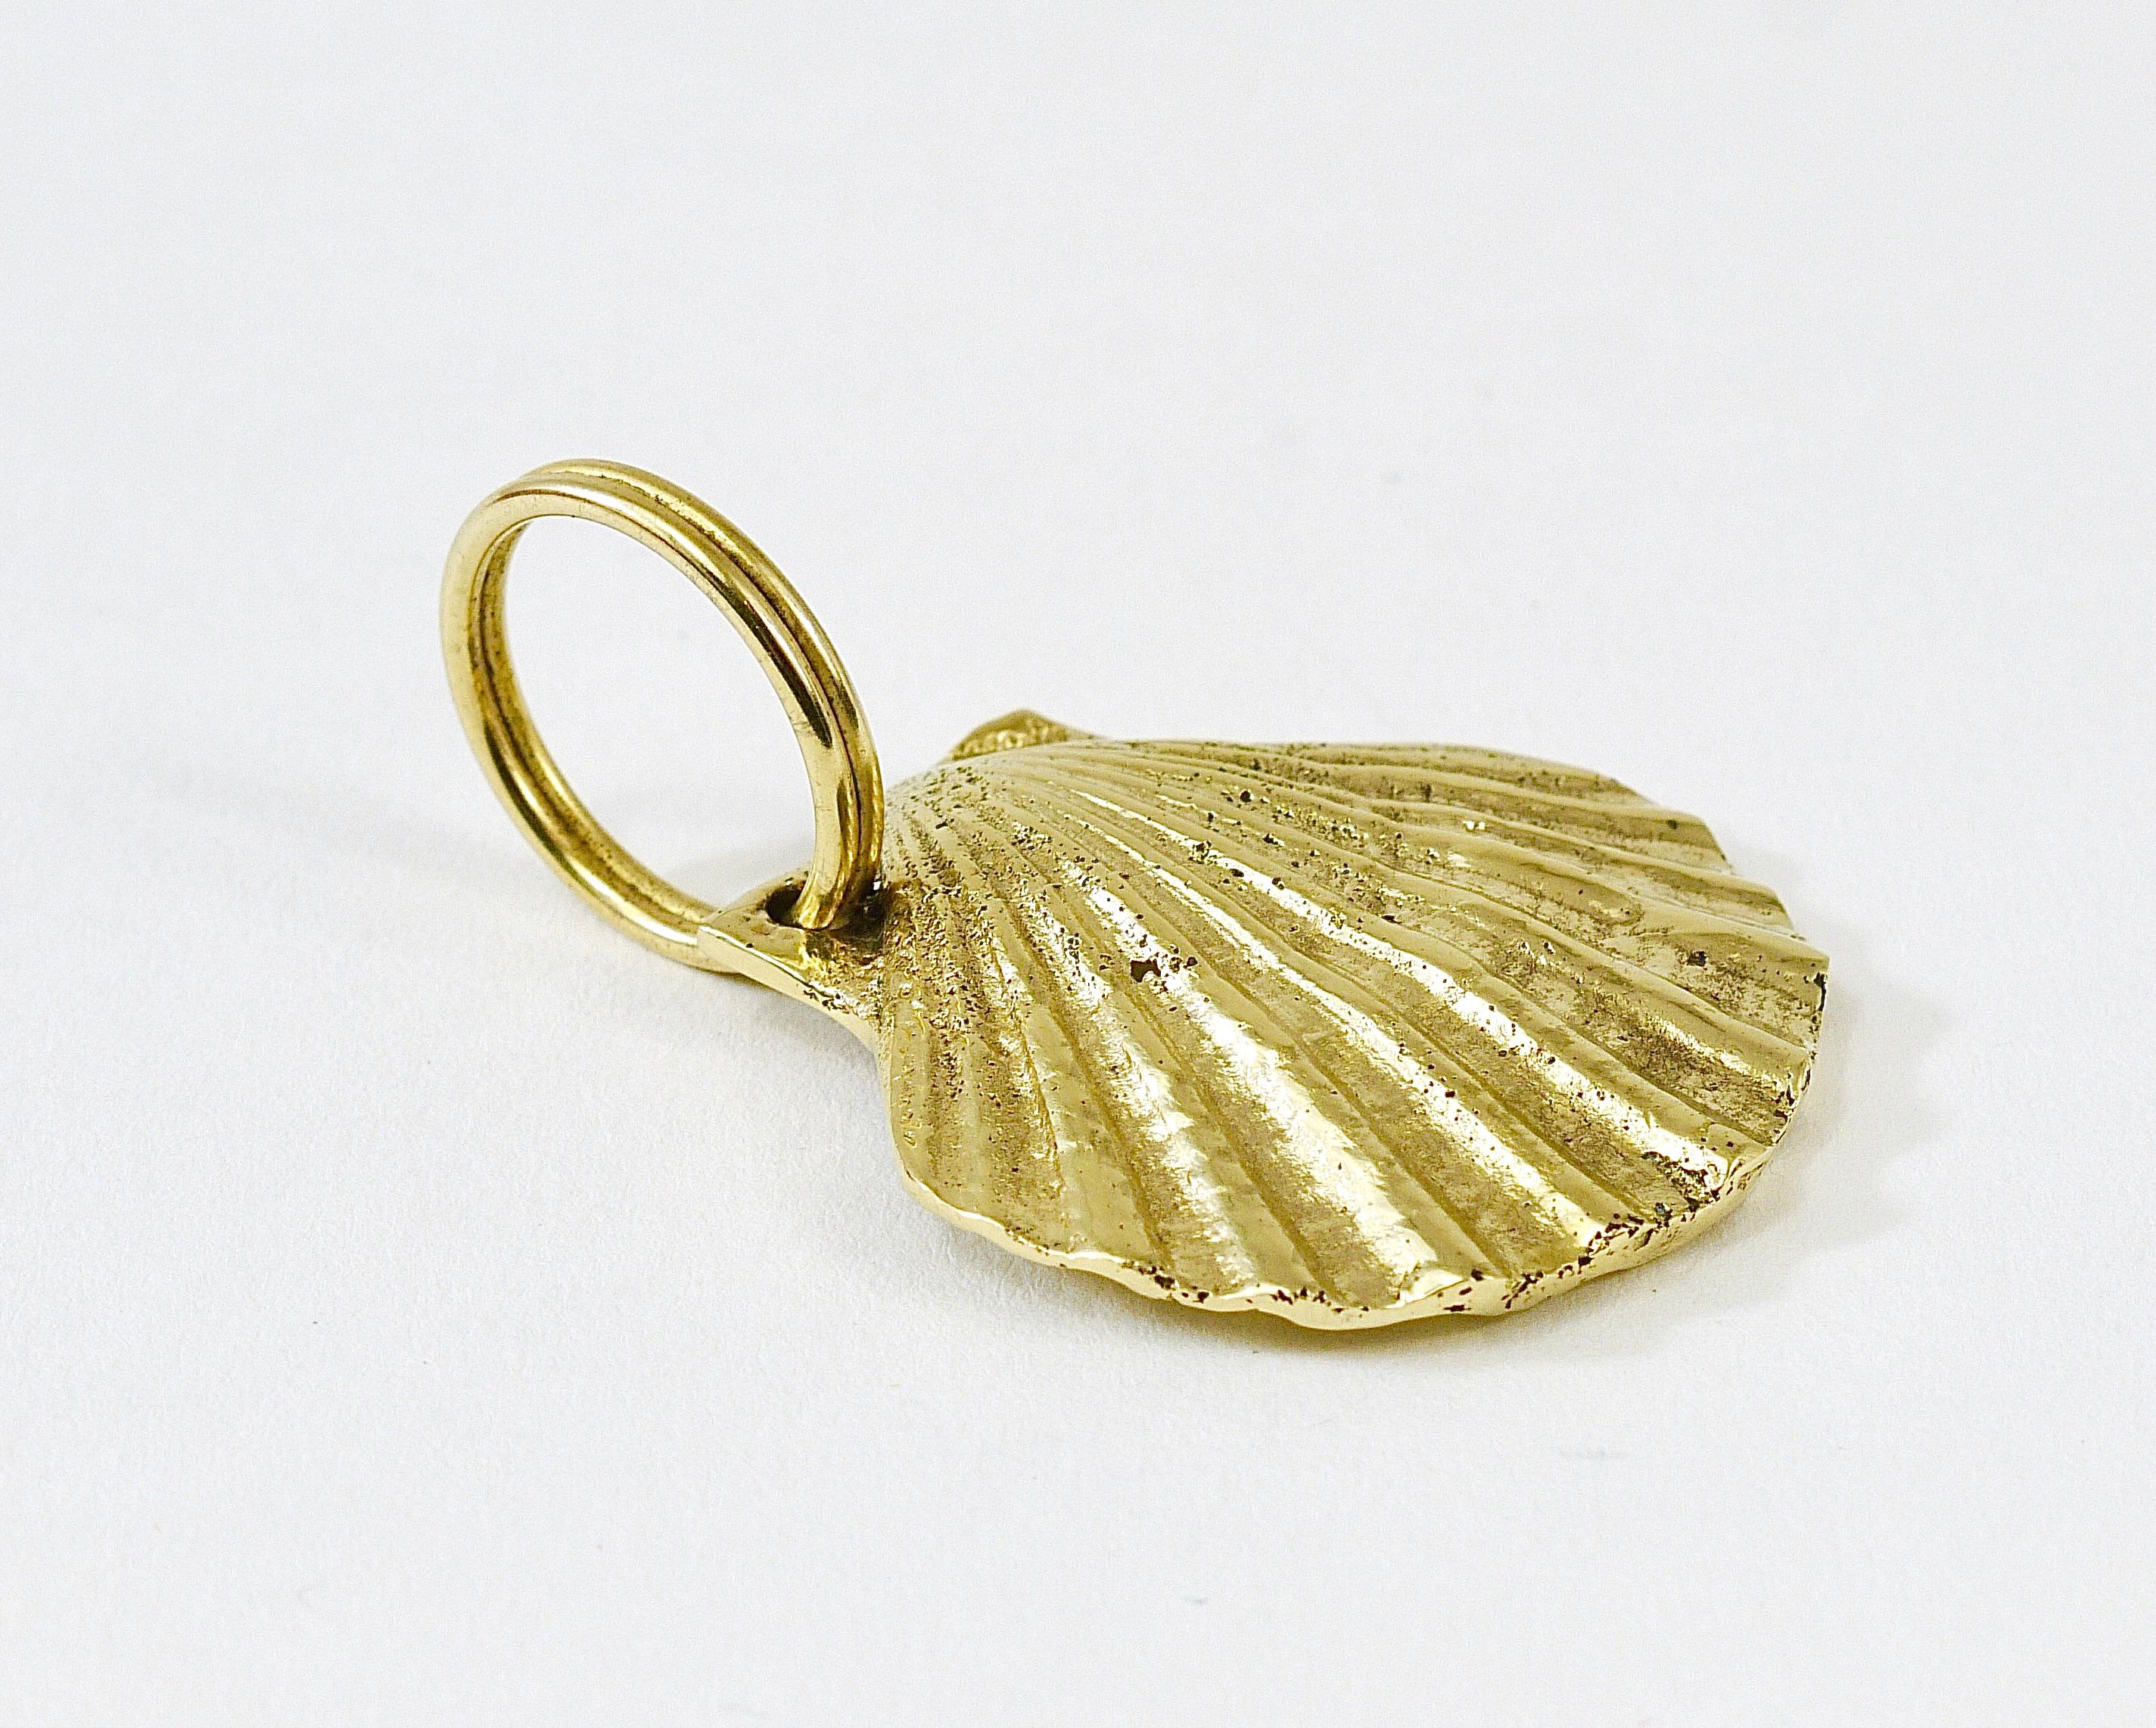 Polished Carl Auböck Handcrafted Midcentury Brass Shell Figurine Key Ring Chain Holder For Sale